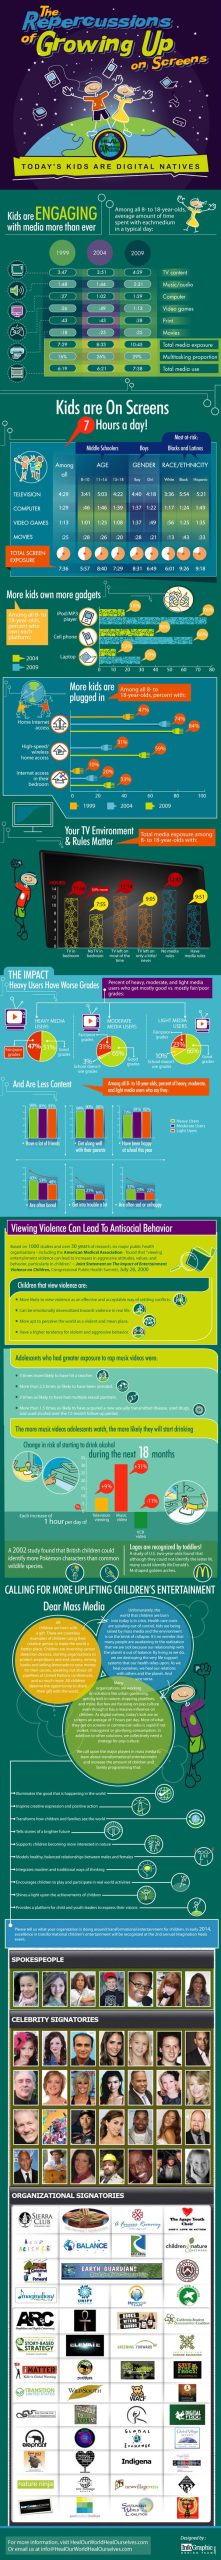 Repercussions of Growing Up with Screens Infographic